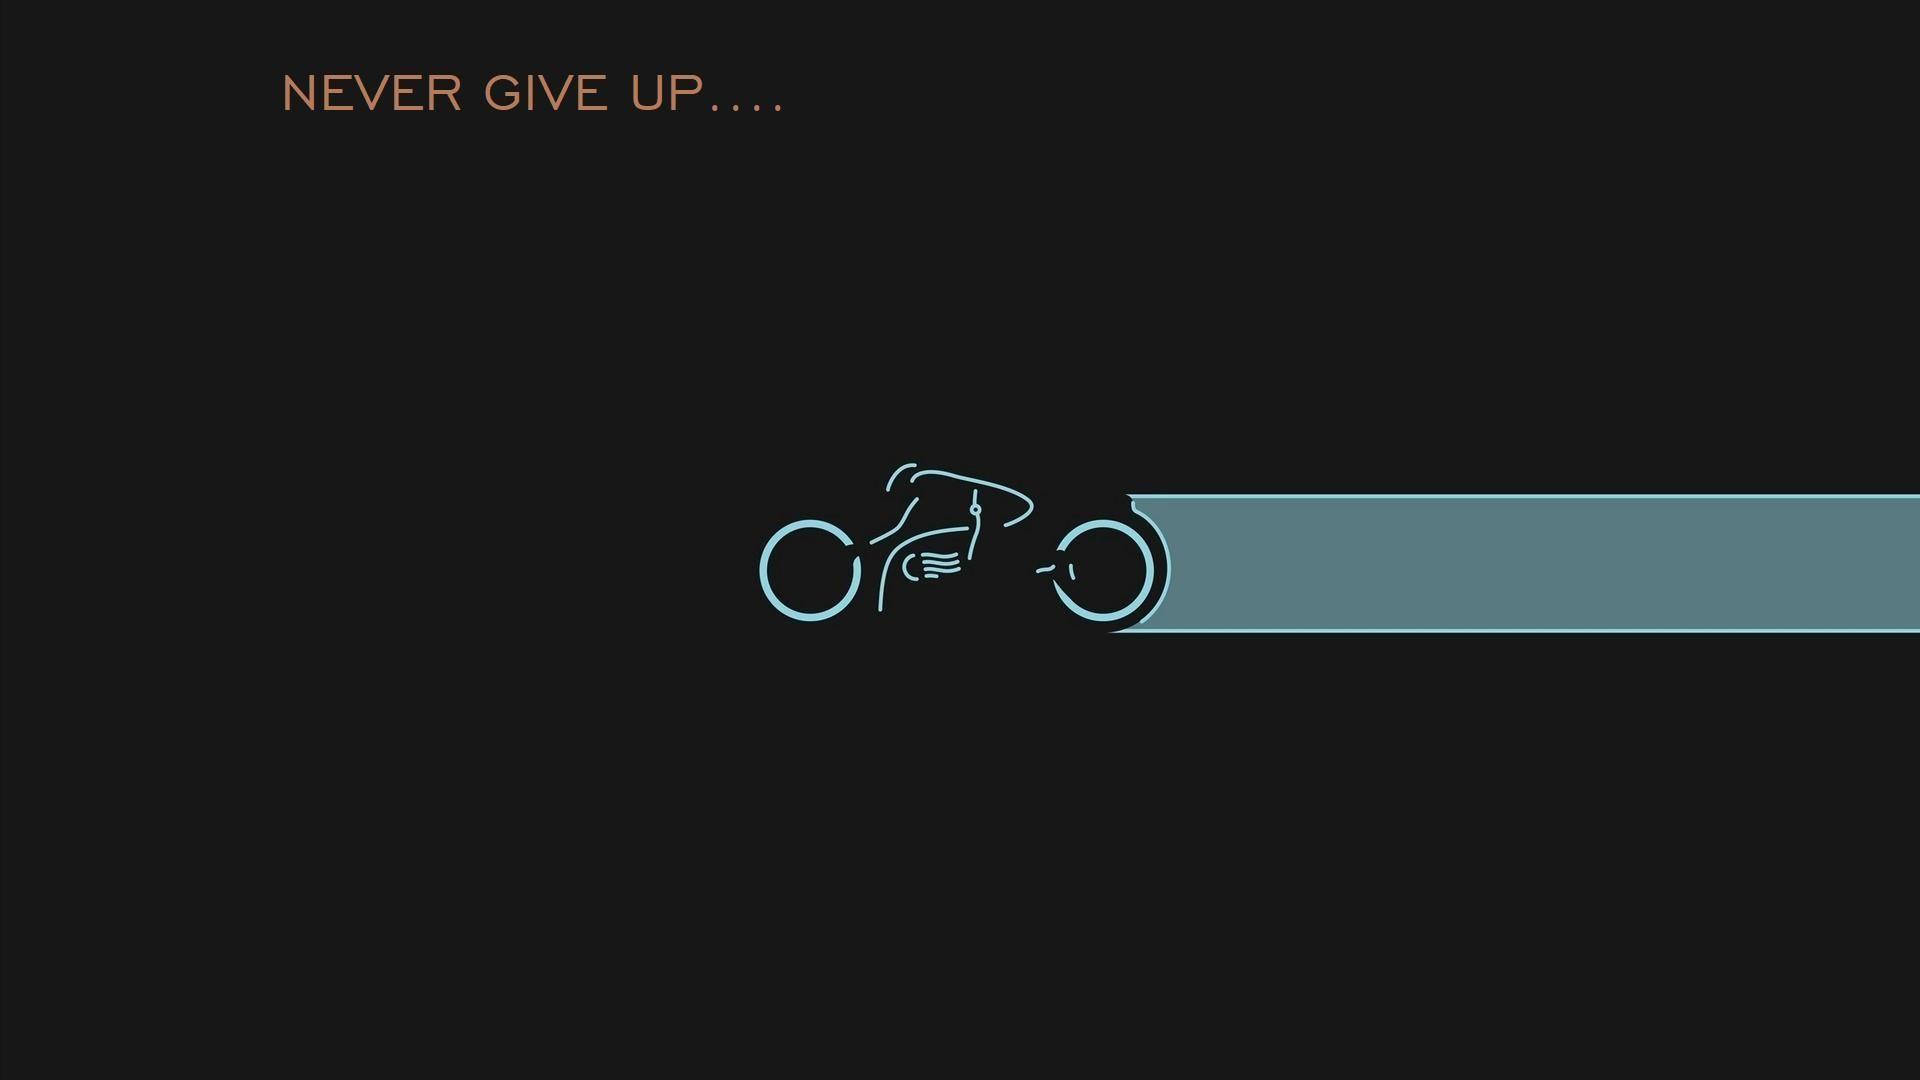 Free Never Give Up Wallpaper Downloads, [100+] Never Give Up Wallpapers for  FREE 